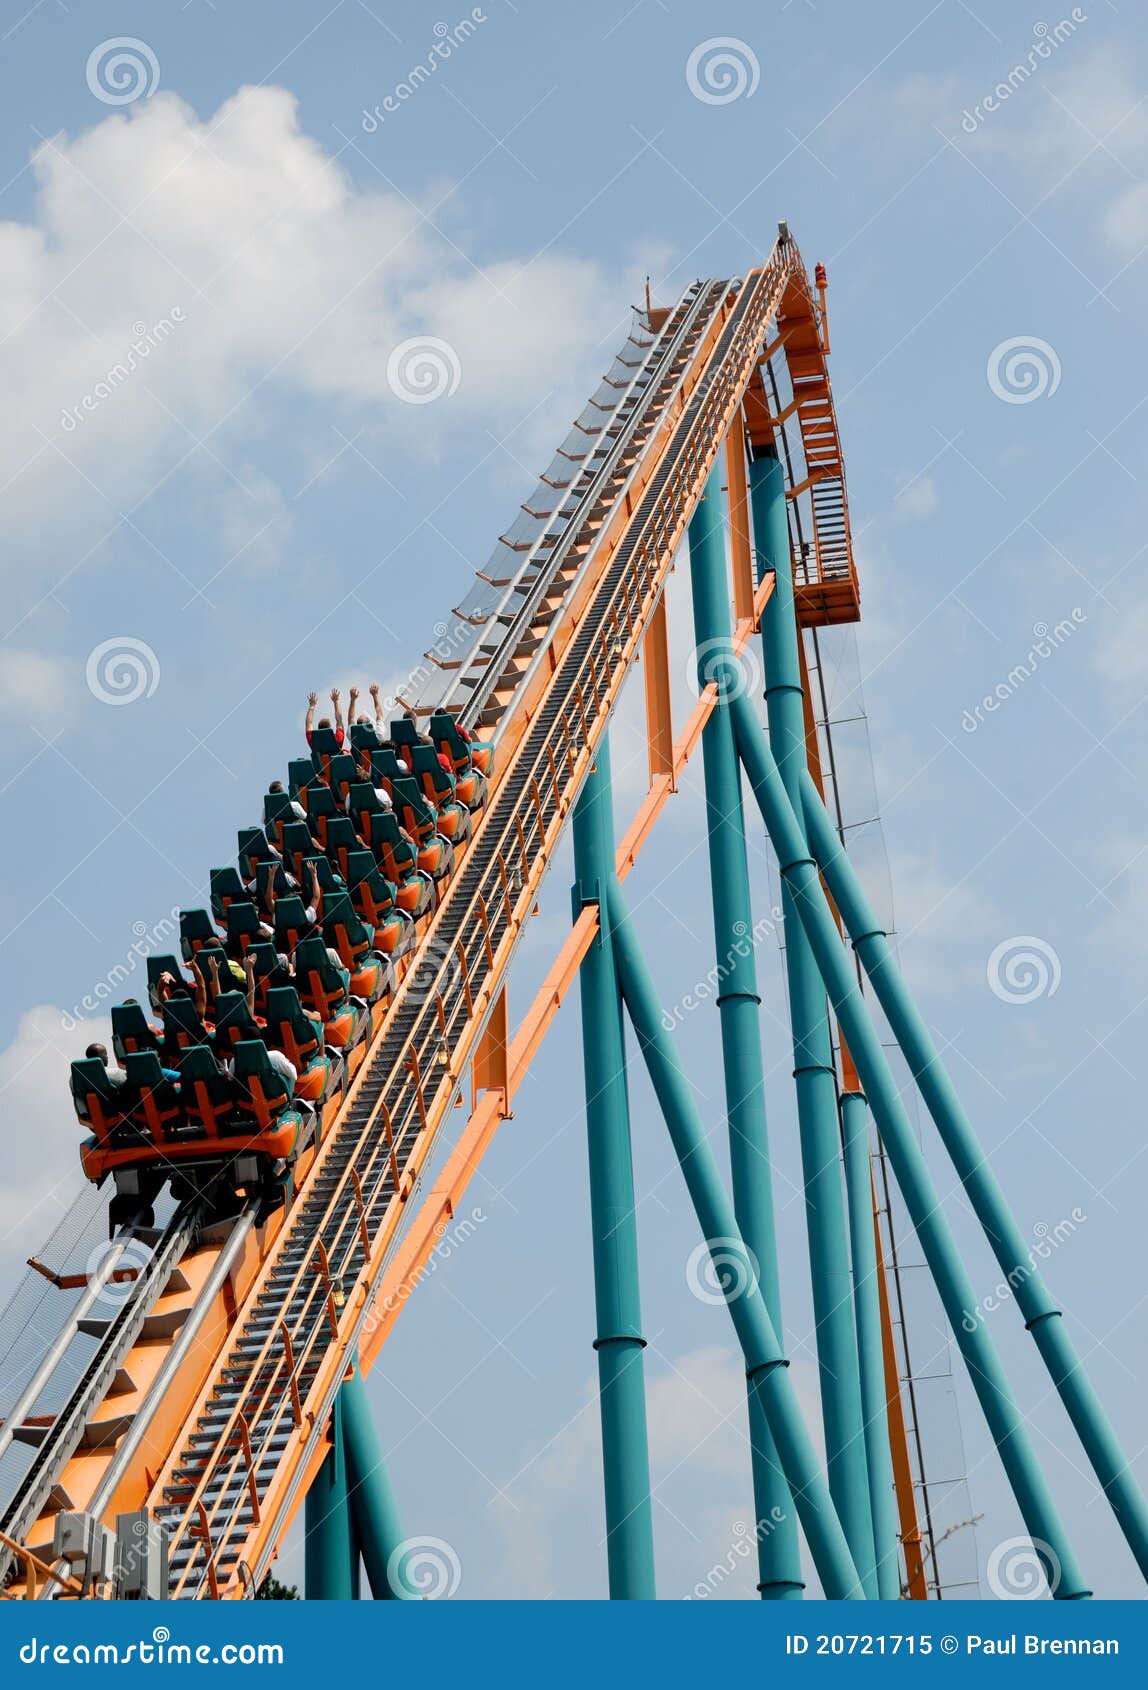 Inclined Plane Roller Coaster